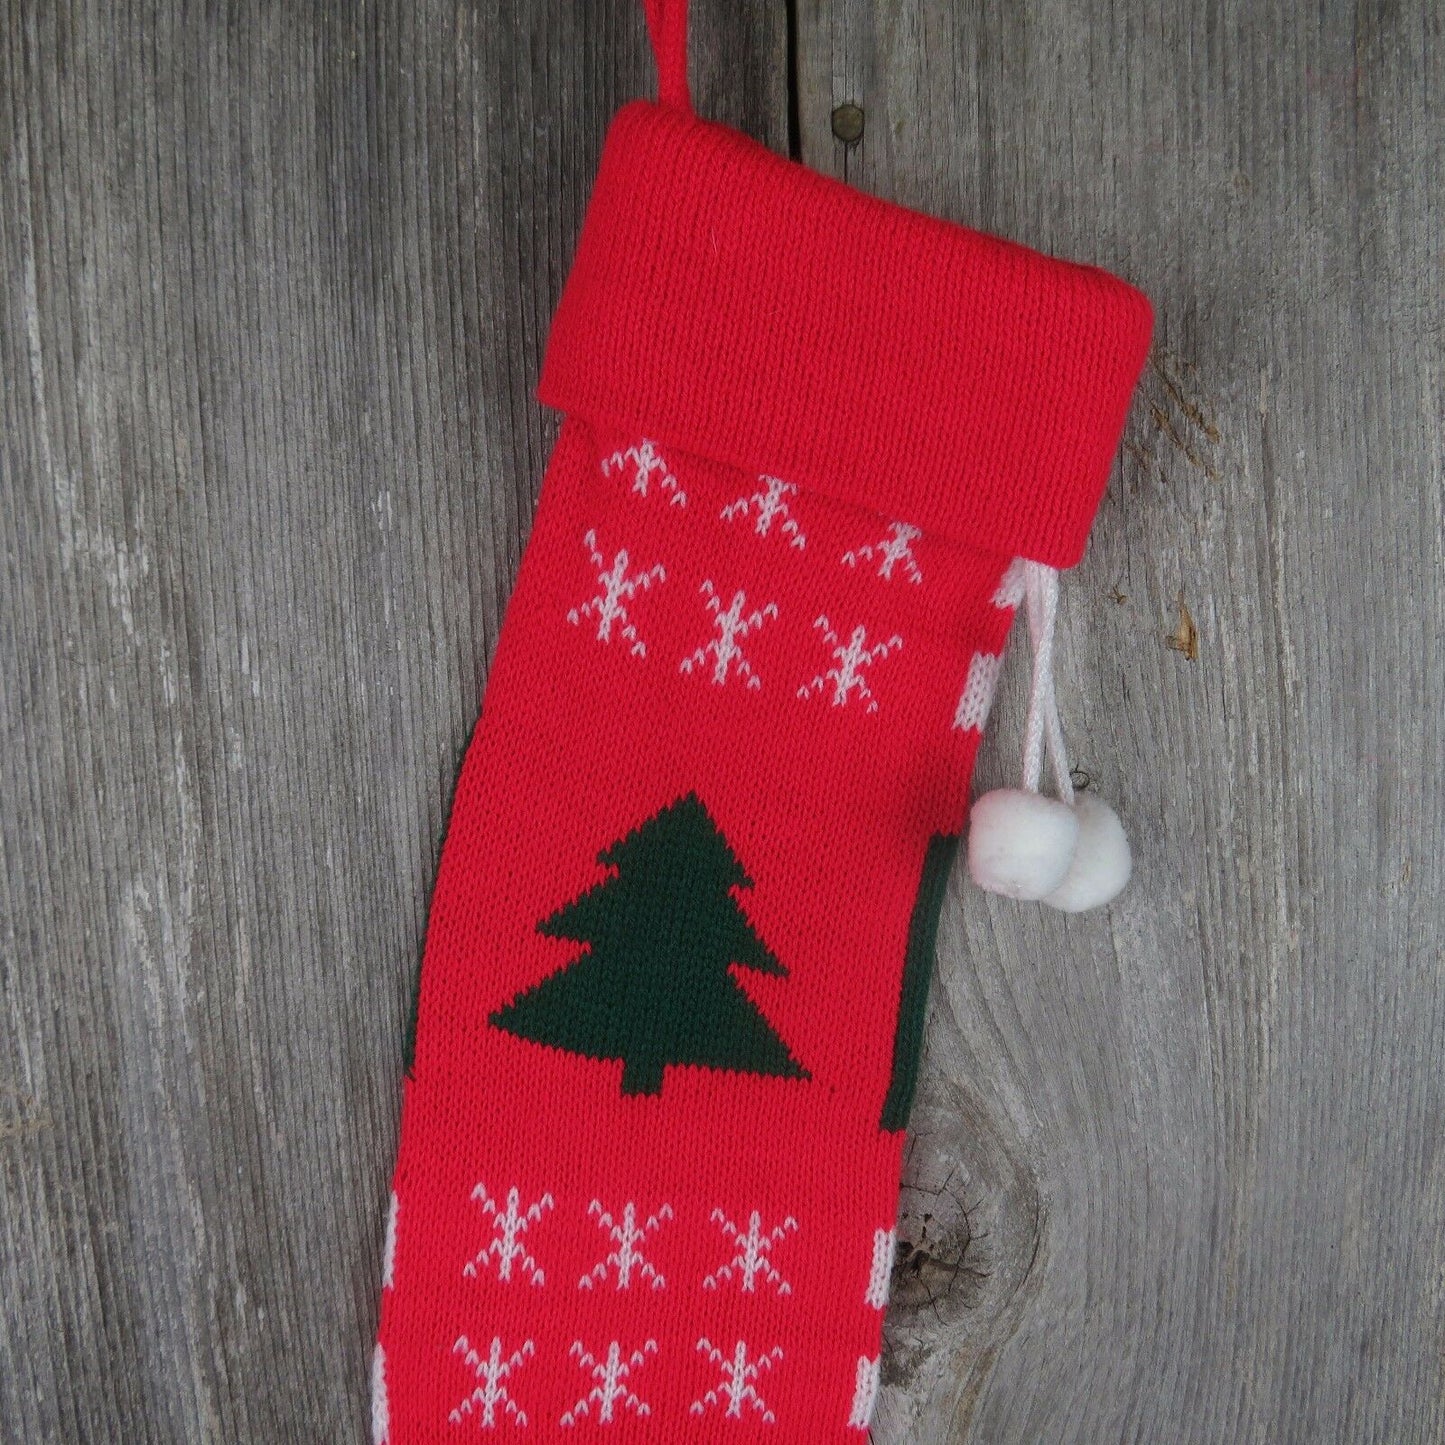 Vintage Christmas Tree Stocking Knitted Knit Green Red Long Snowflakes ST1 - At Grandma's Table